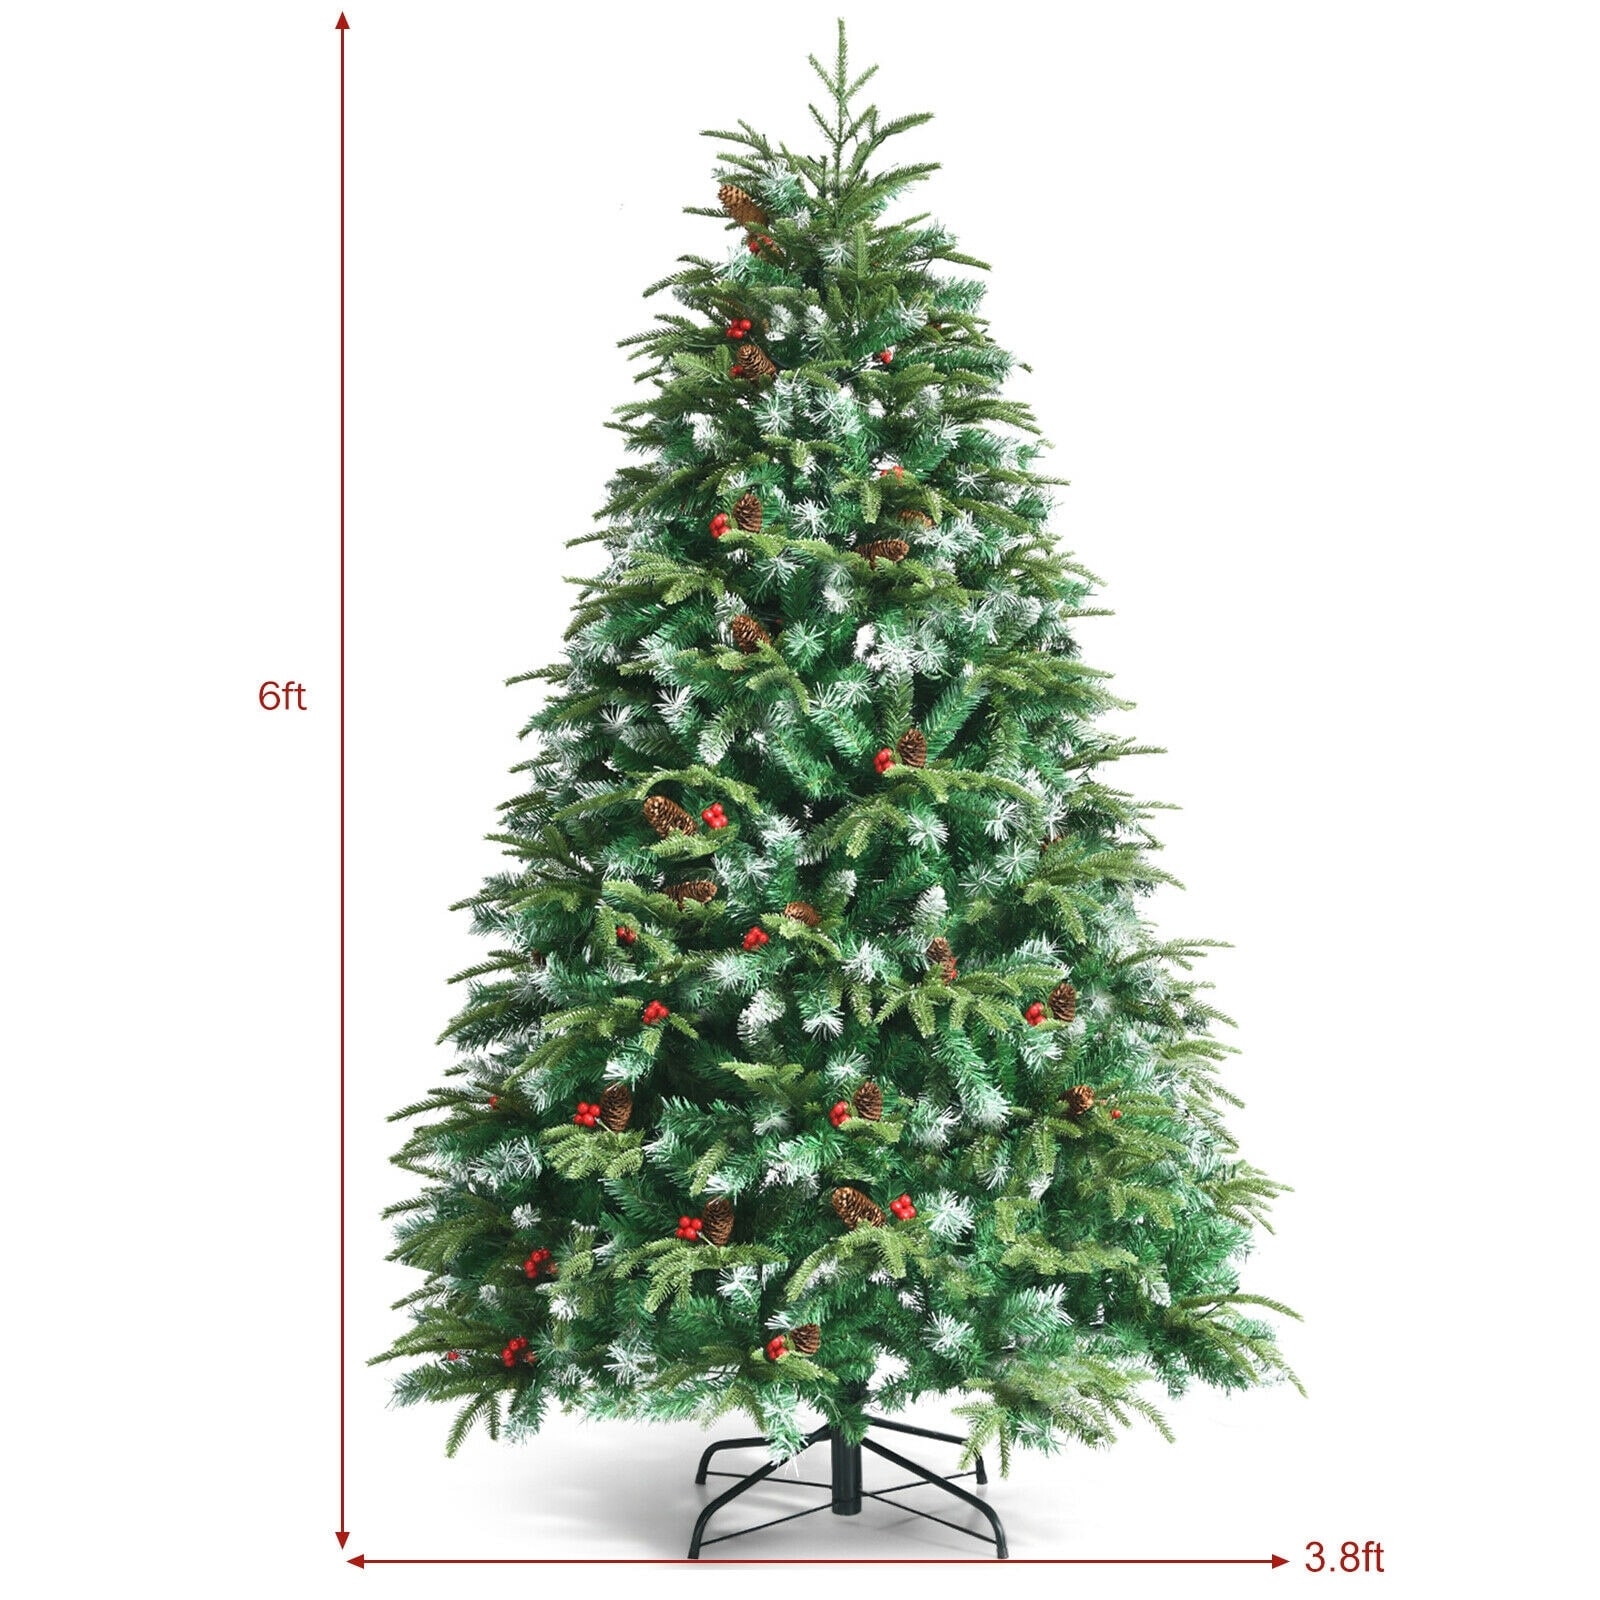 Forclover 6-ft Pre-lit Artificial Christmas Tree with LED Lights in the ...